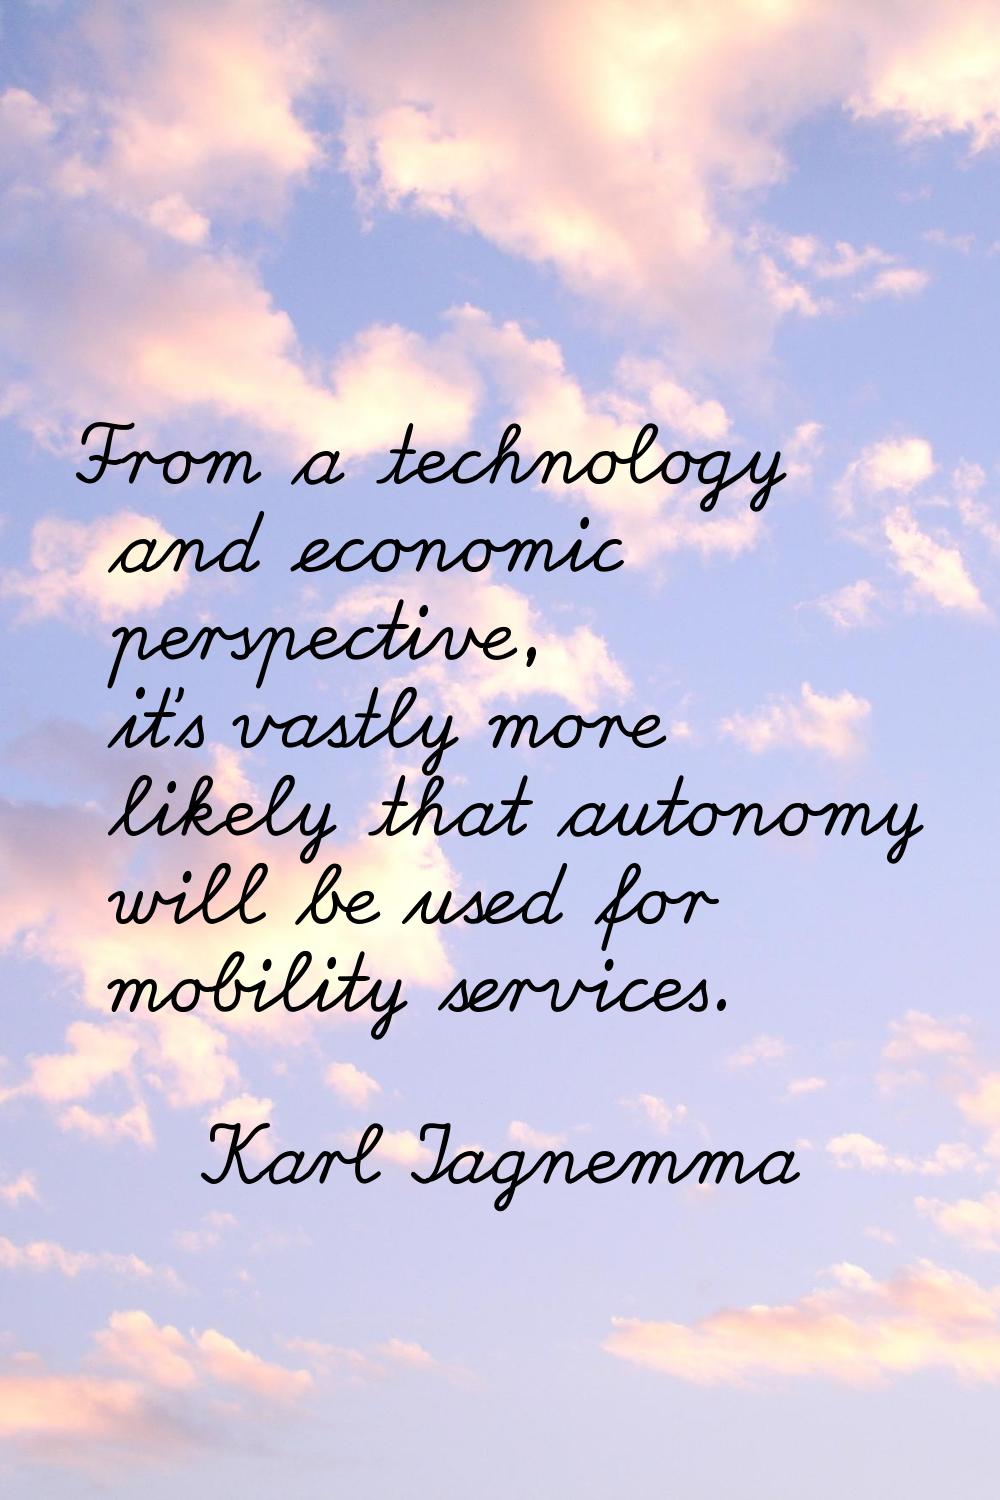 From a technology and economic perspective, it's vastly more likely that autonomy will be used for 